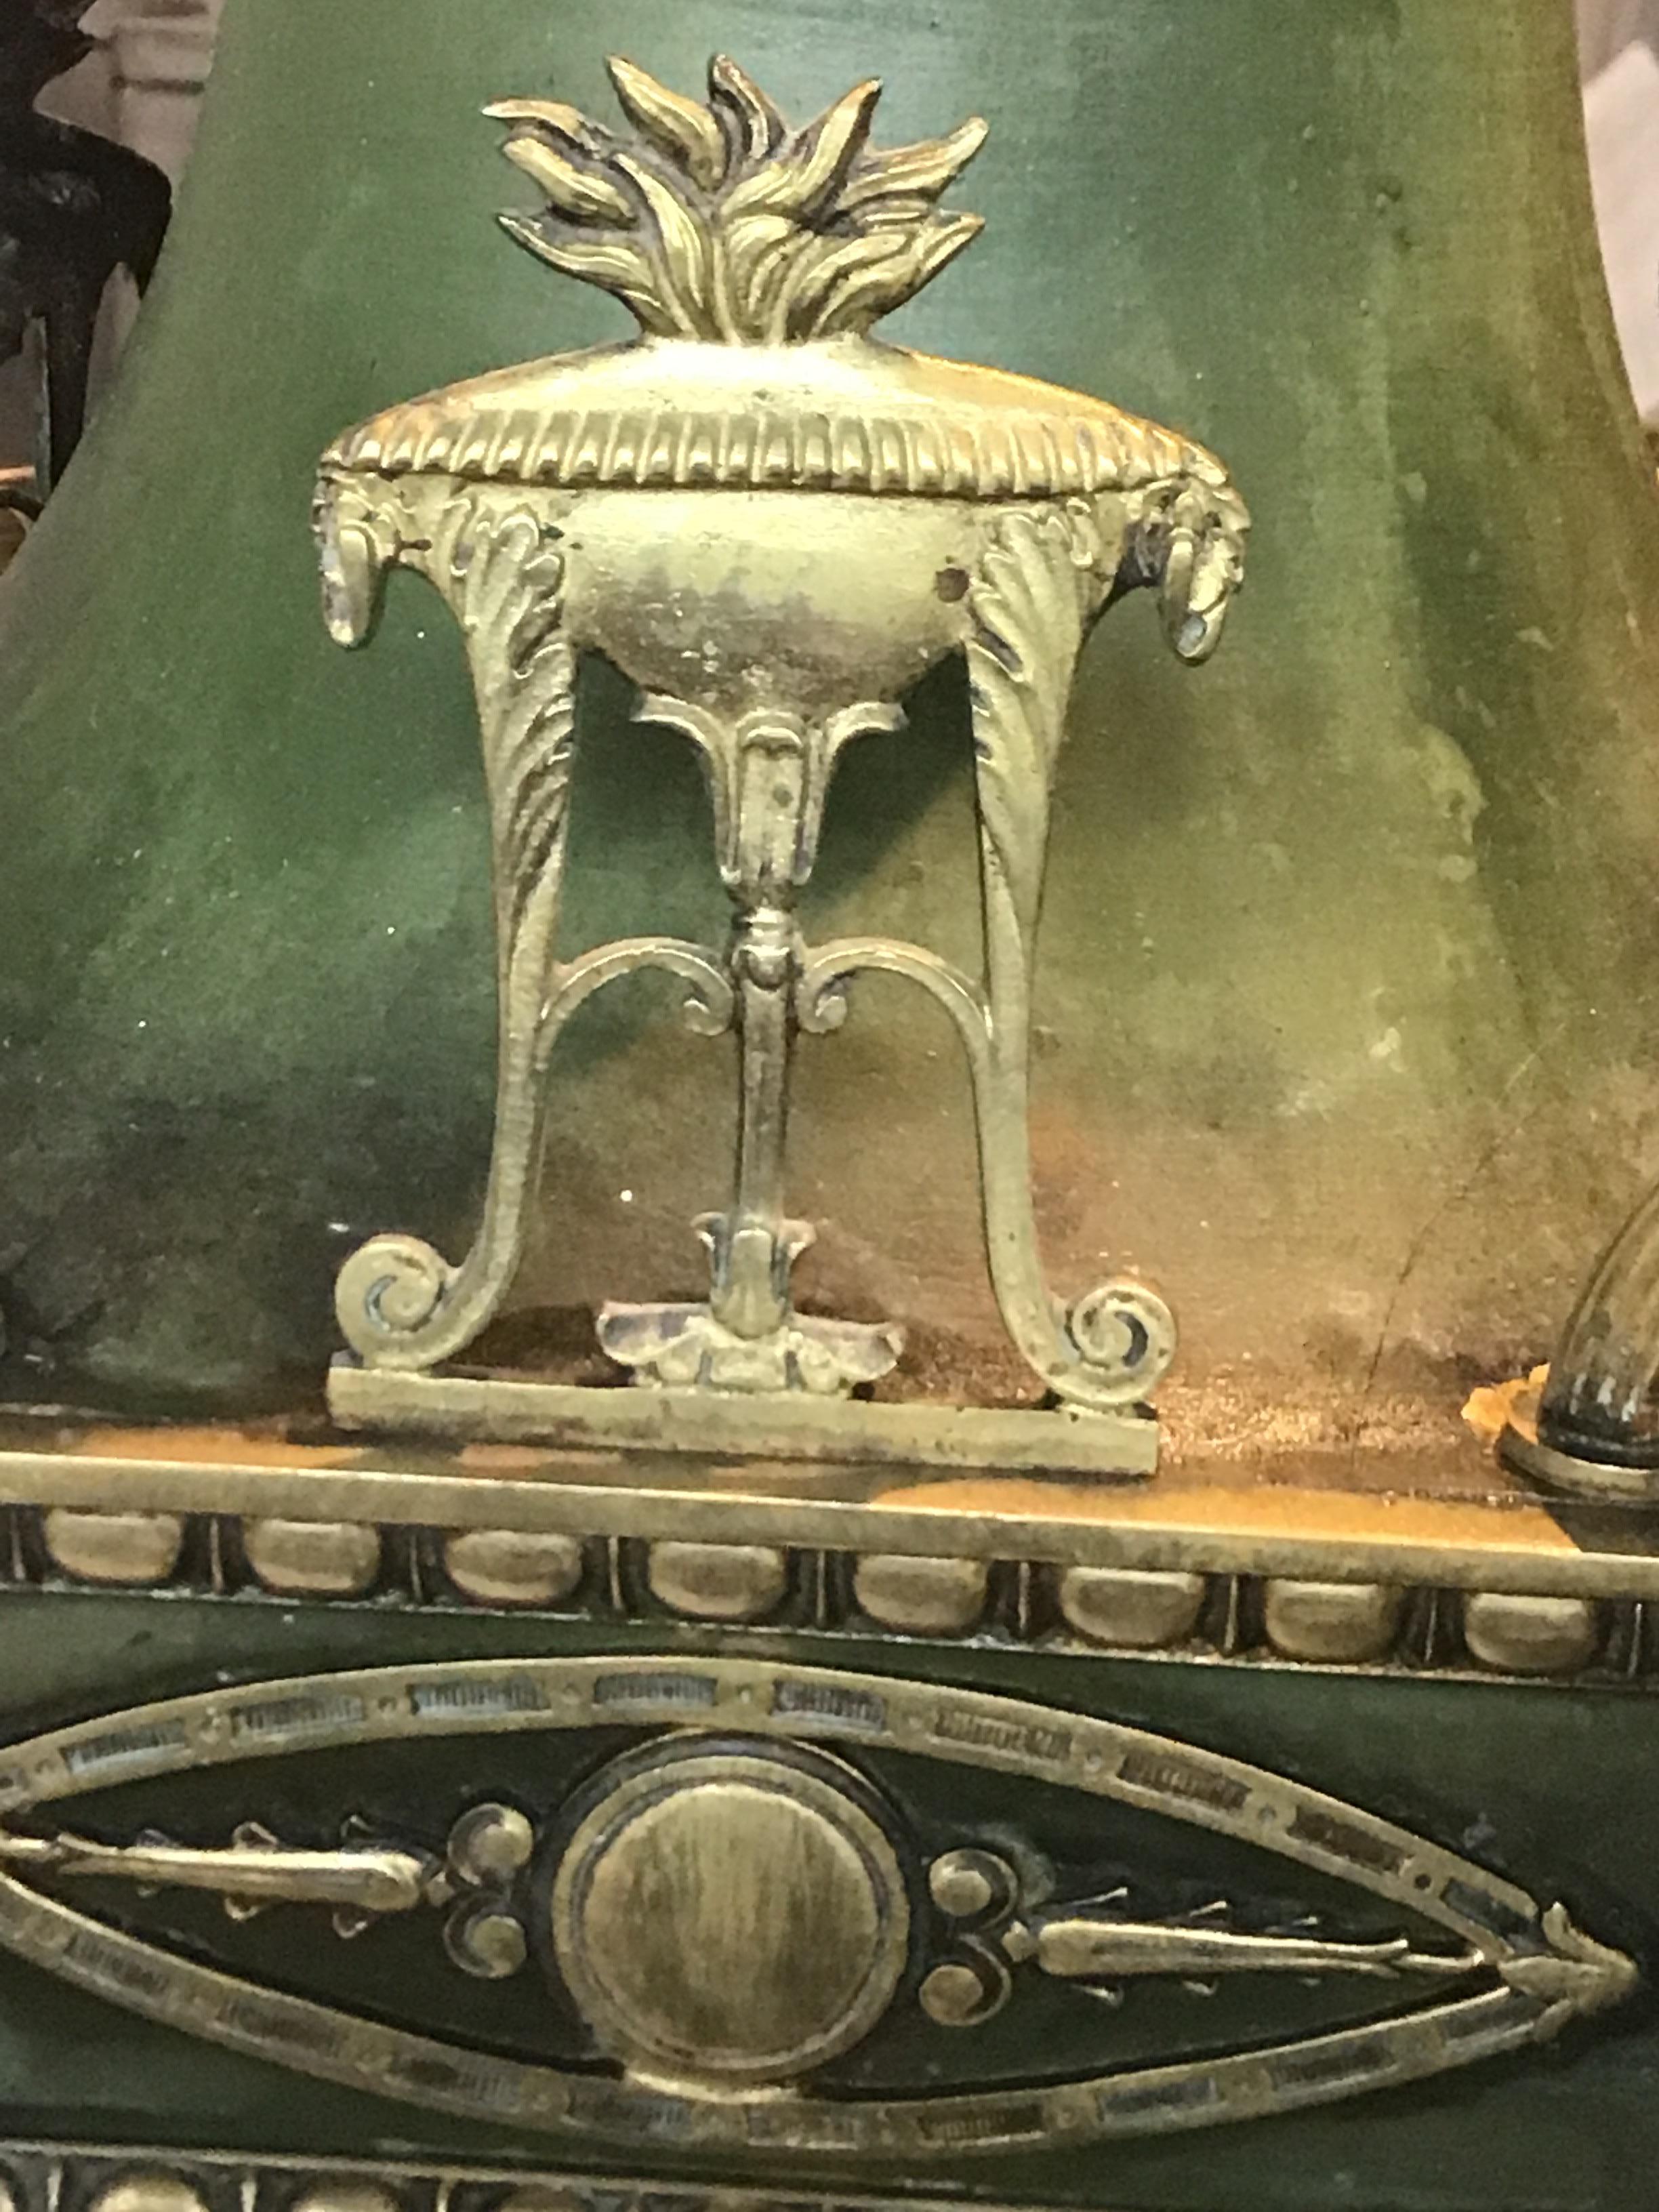 1920s brass with green finish classical chandelier. Adorned with urns of fire with ram heads. I’ve never seen this model before. Very special.